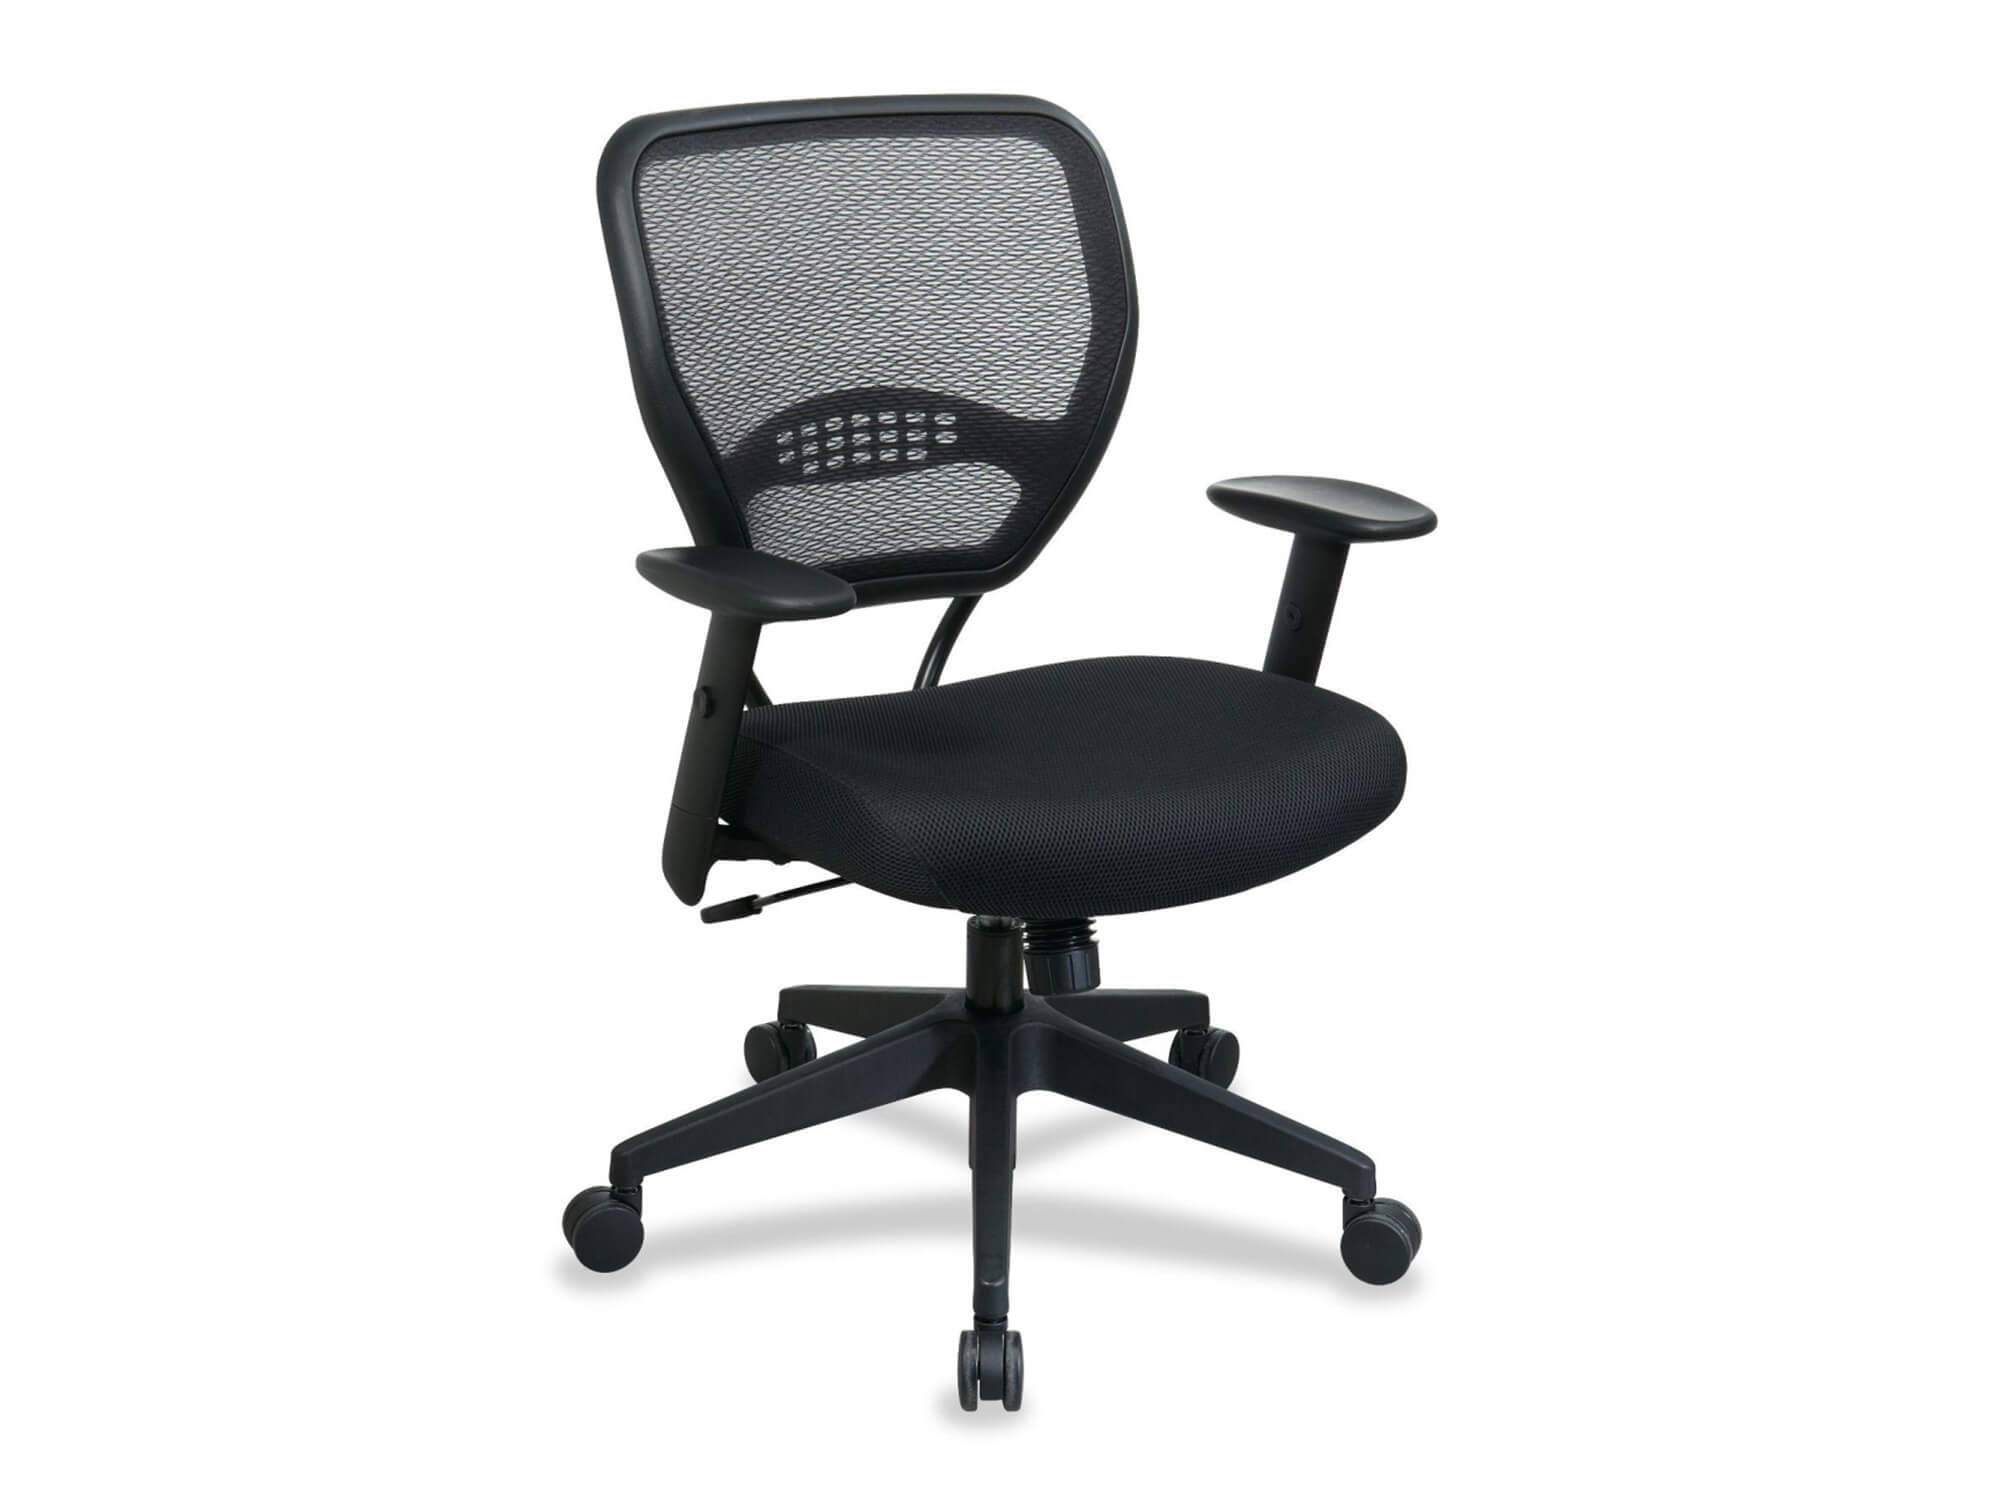 chairs-for-office-best-ergonomic-chairs.jpg